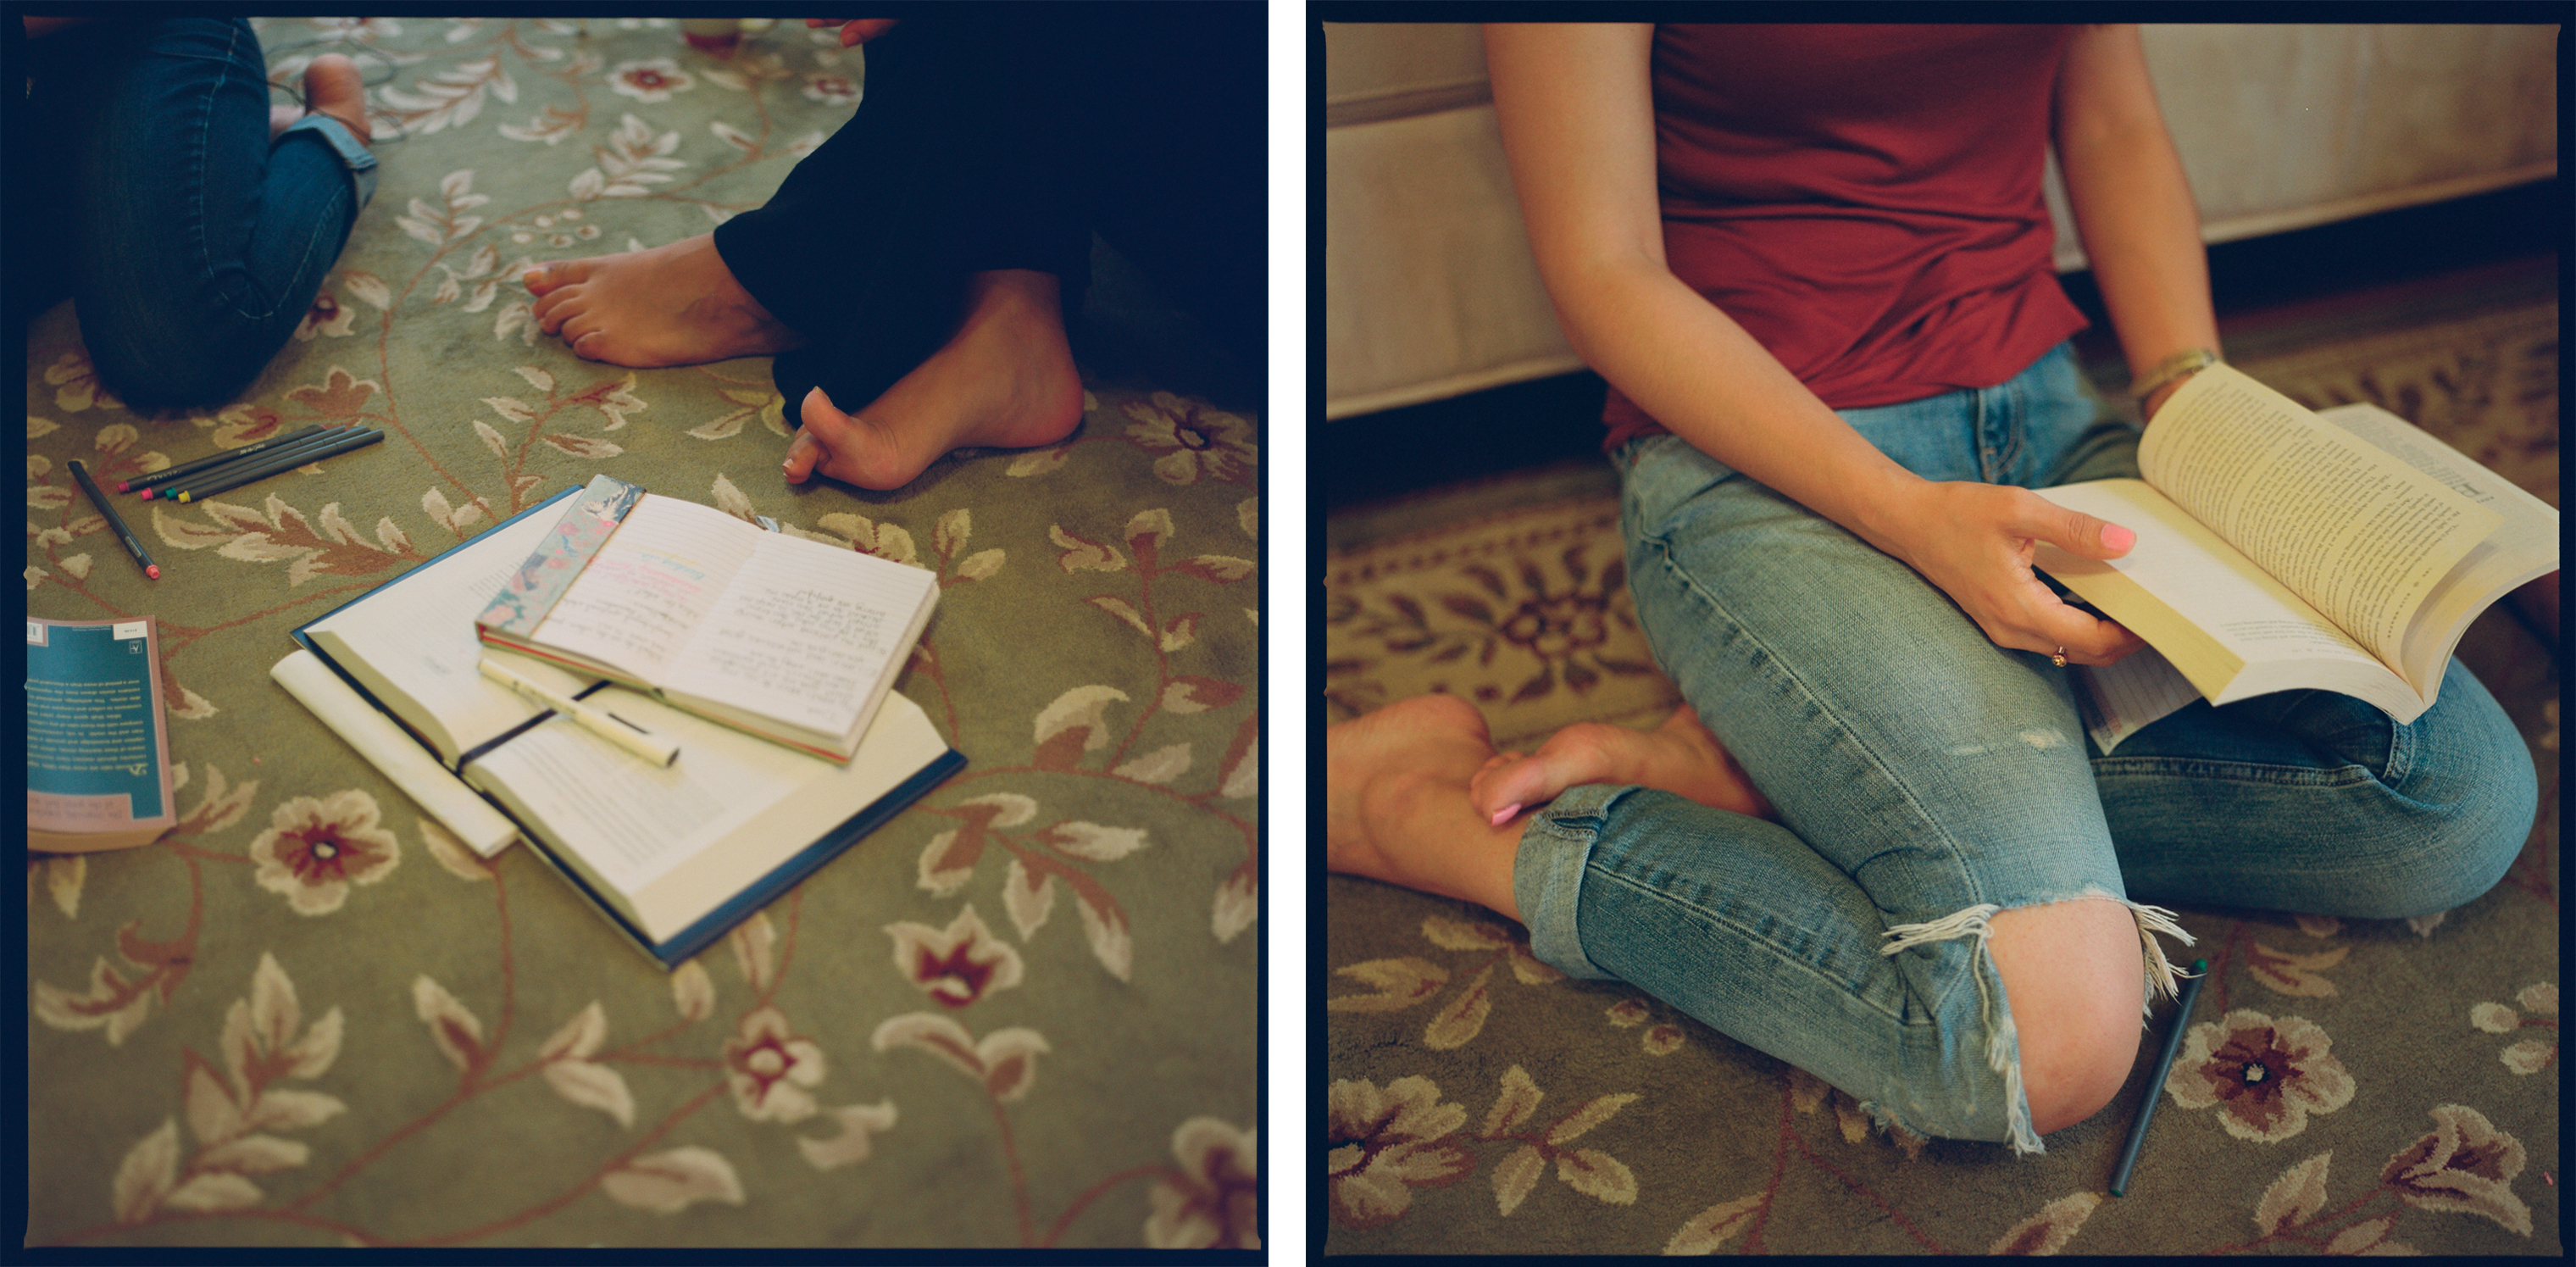 The halaqa members bring notes and reading materials to inspire their monthly discussions about theology, philosophy and personal struggles. (Miranda Barnes for TIME)